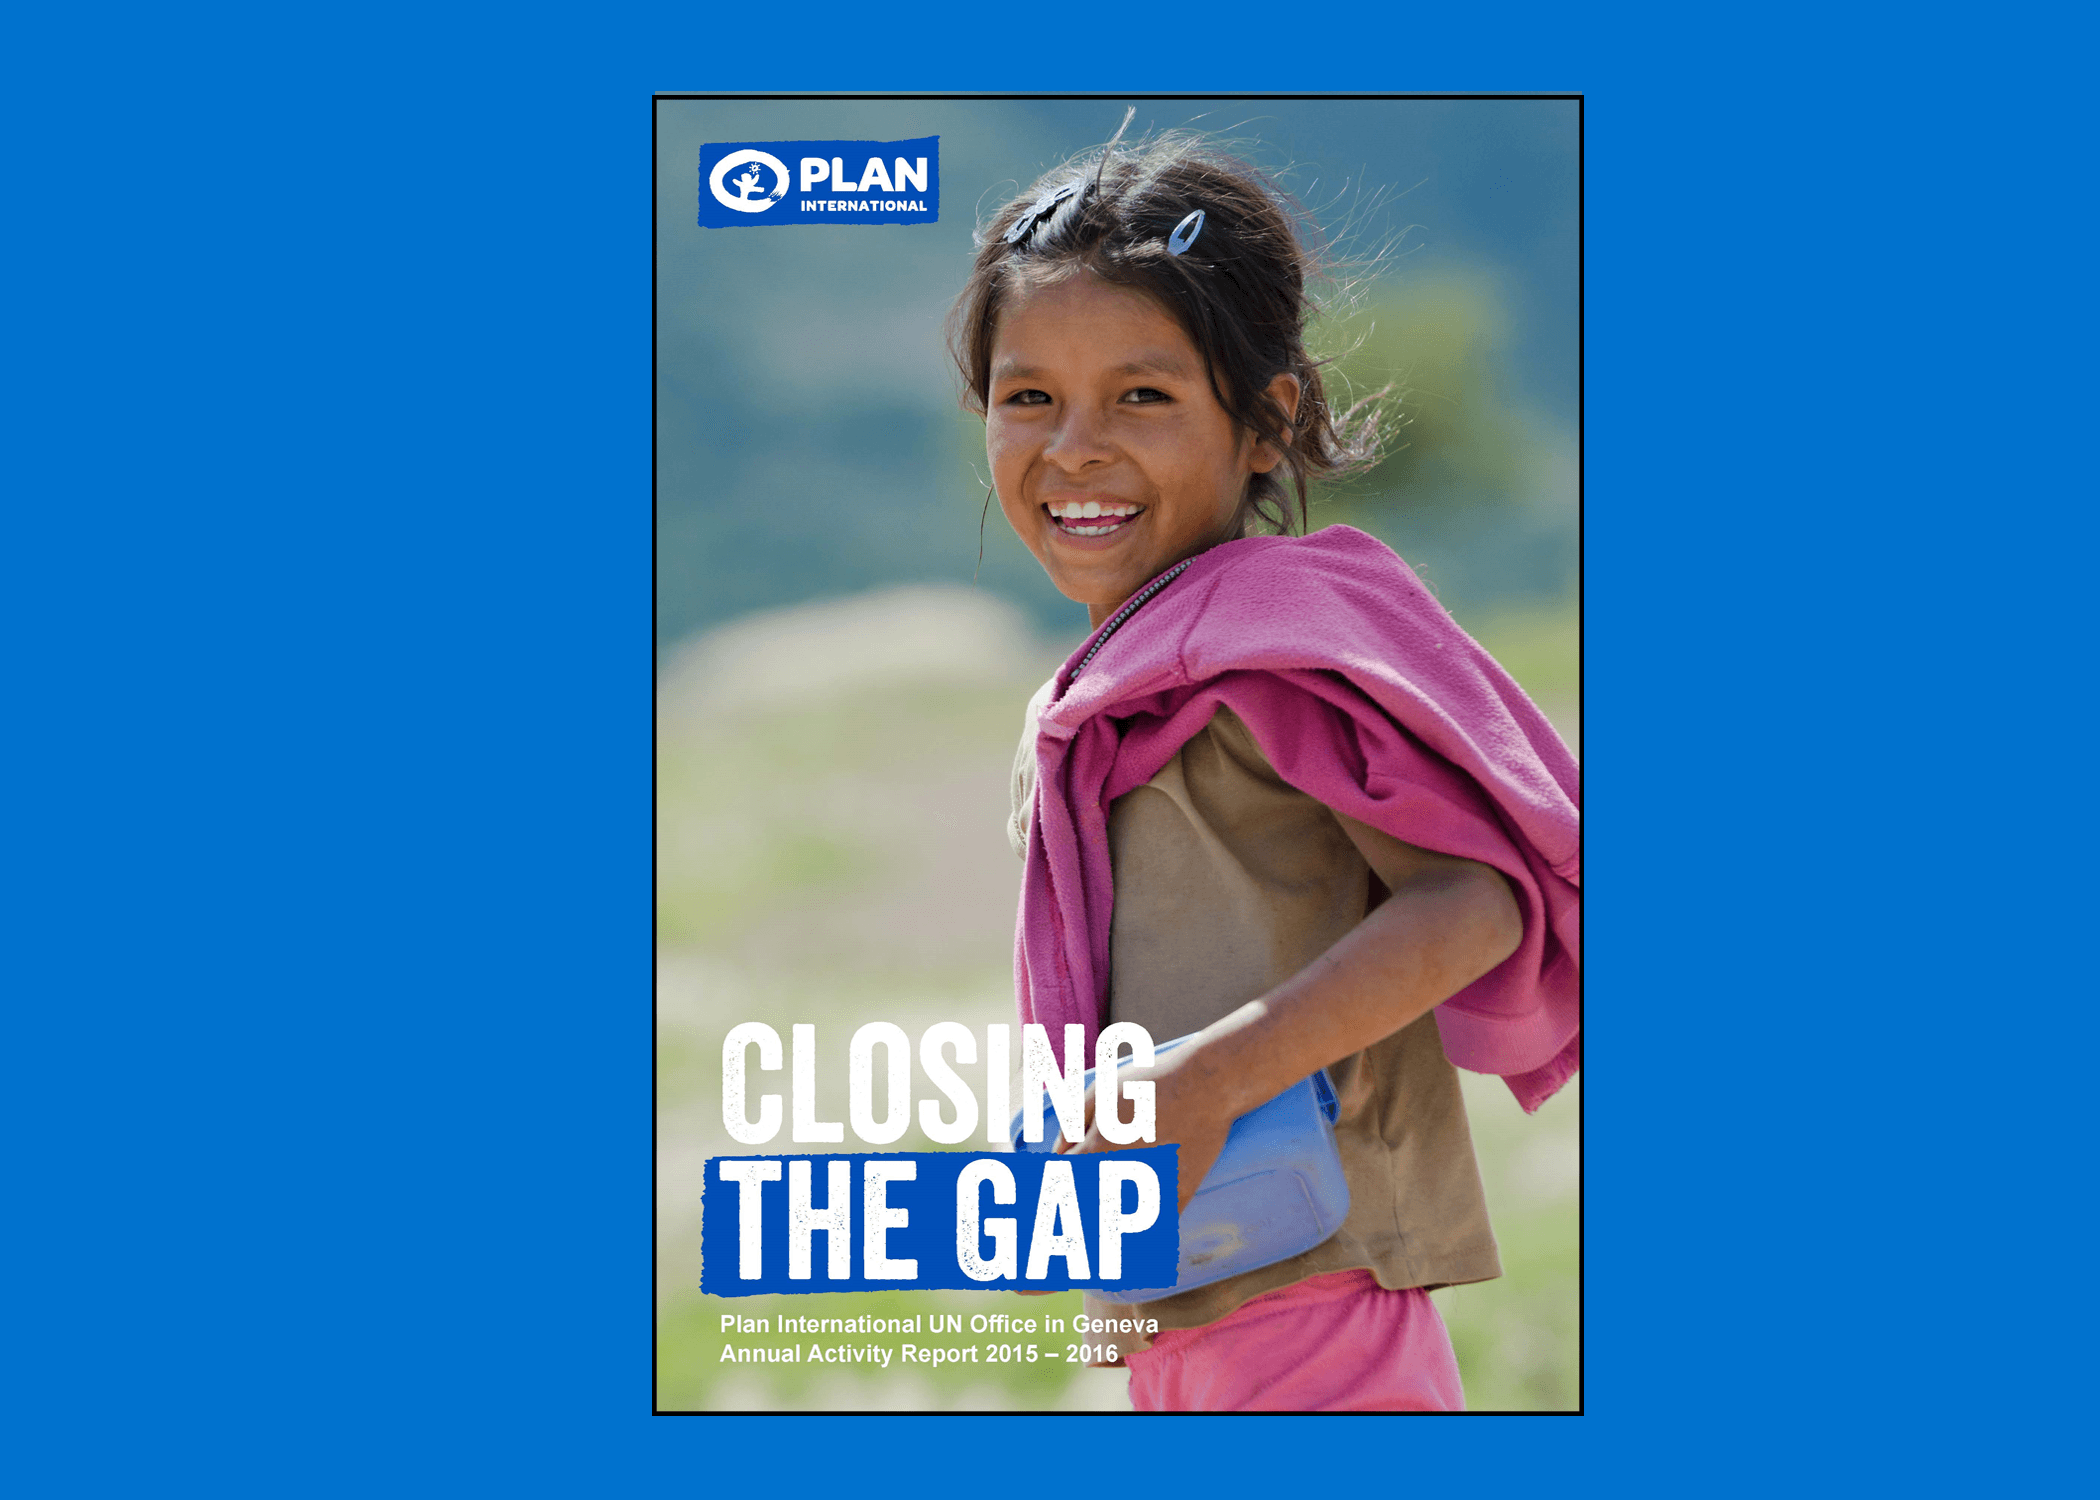 Closing the gap Plan International UN Office in Geneva Annual Activity report 2015-2016 front cover image